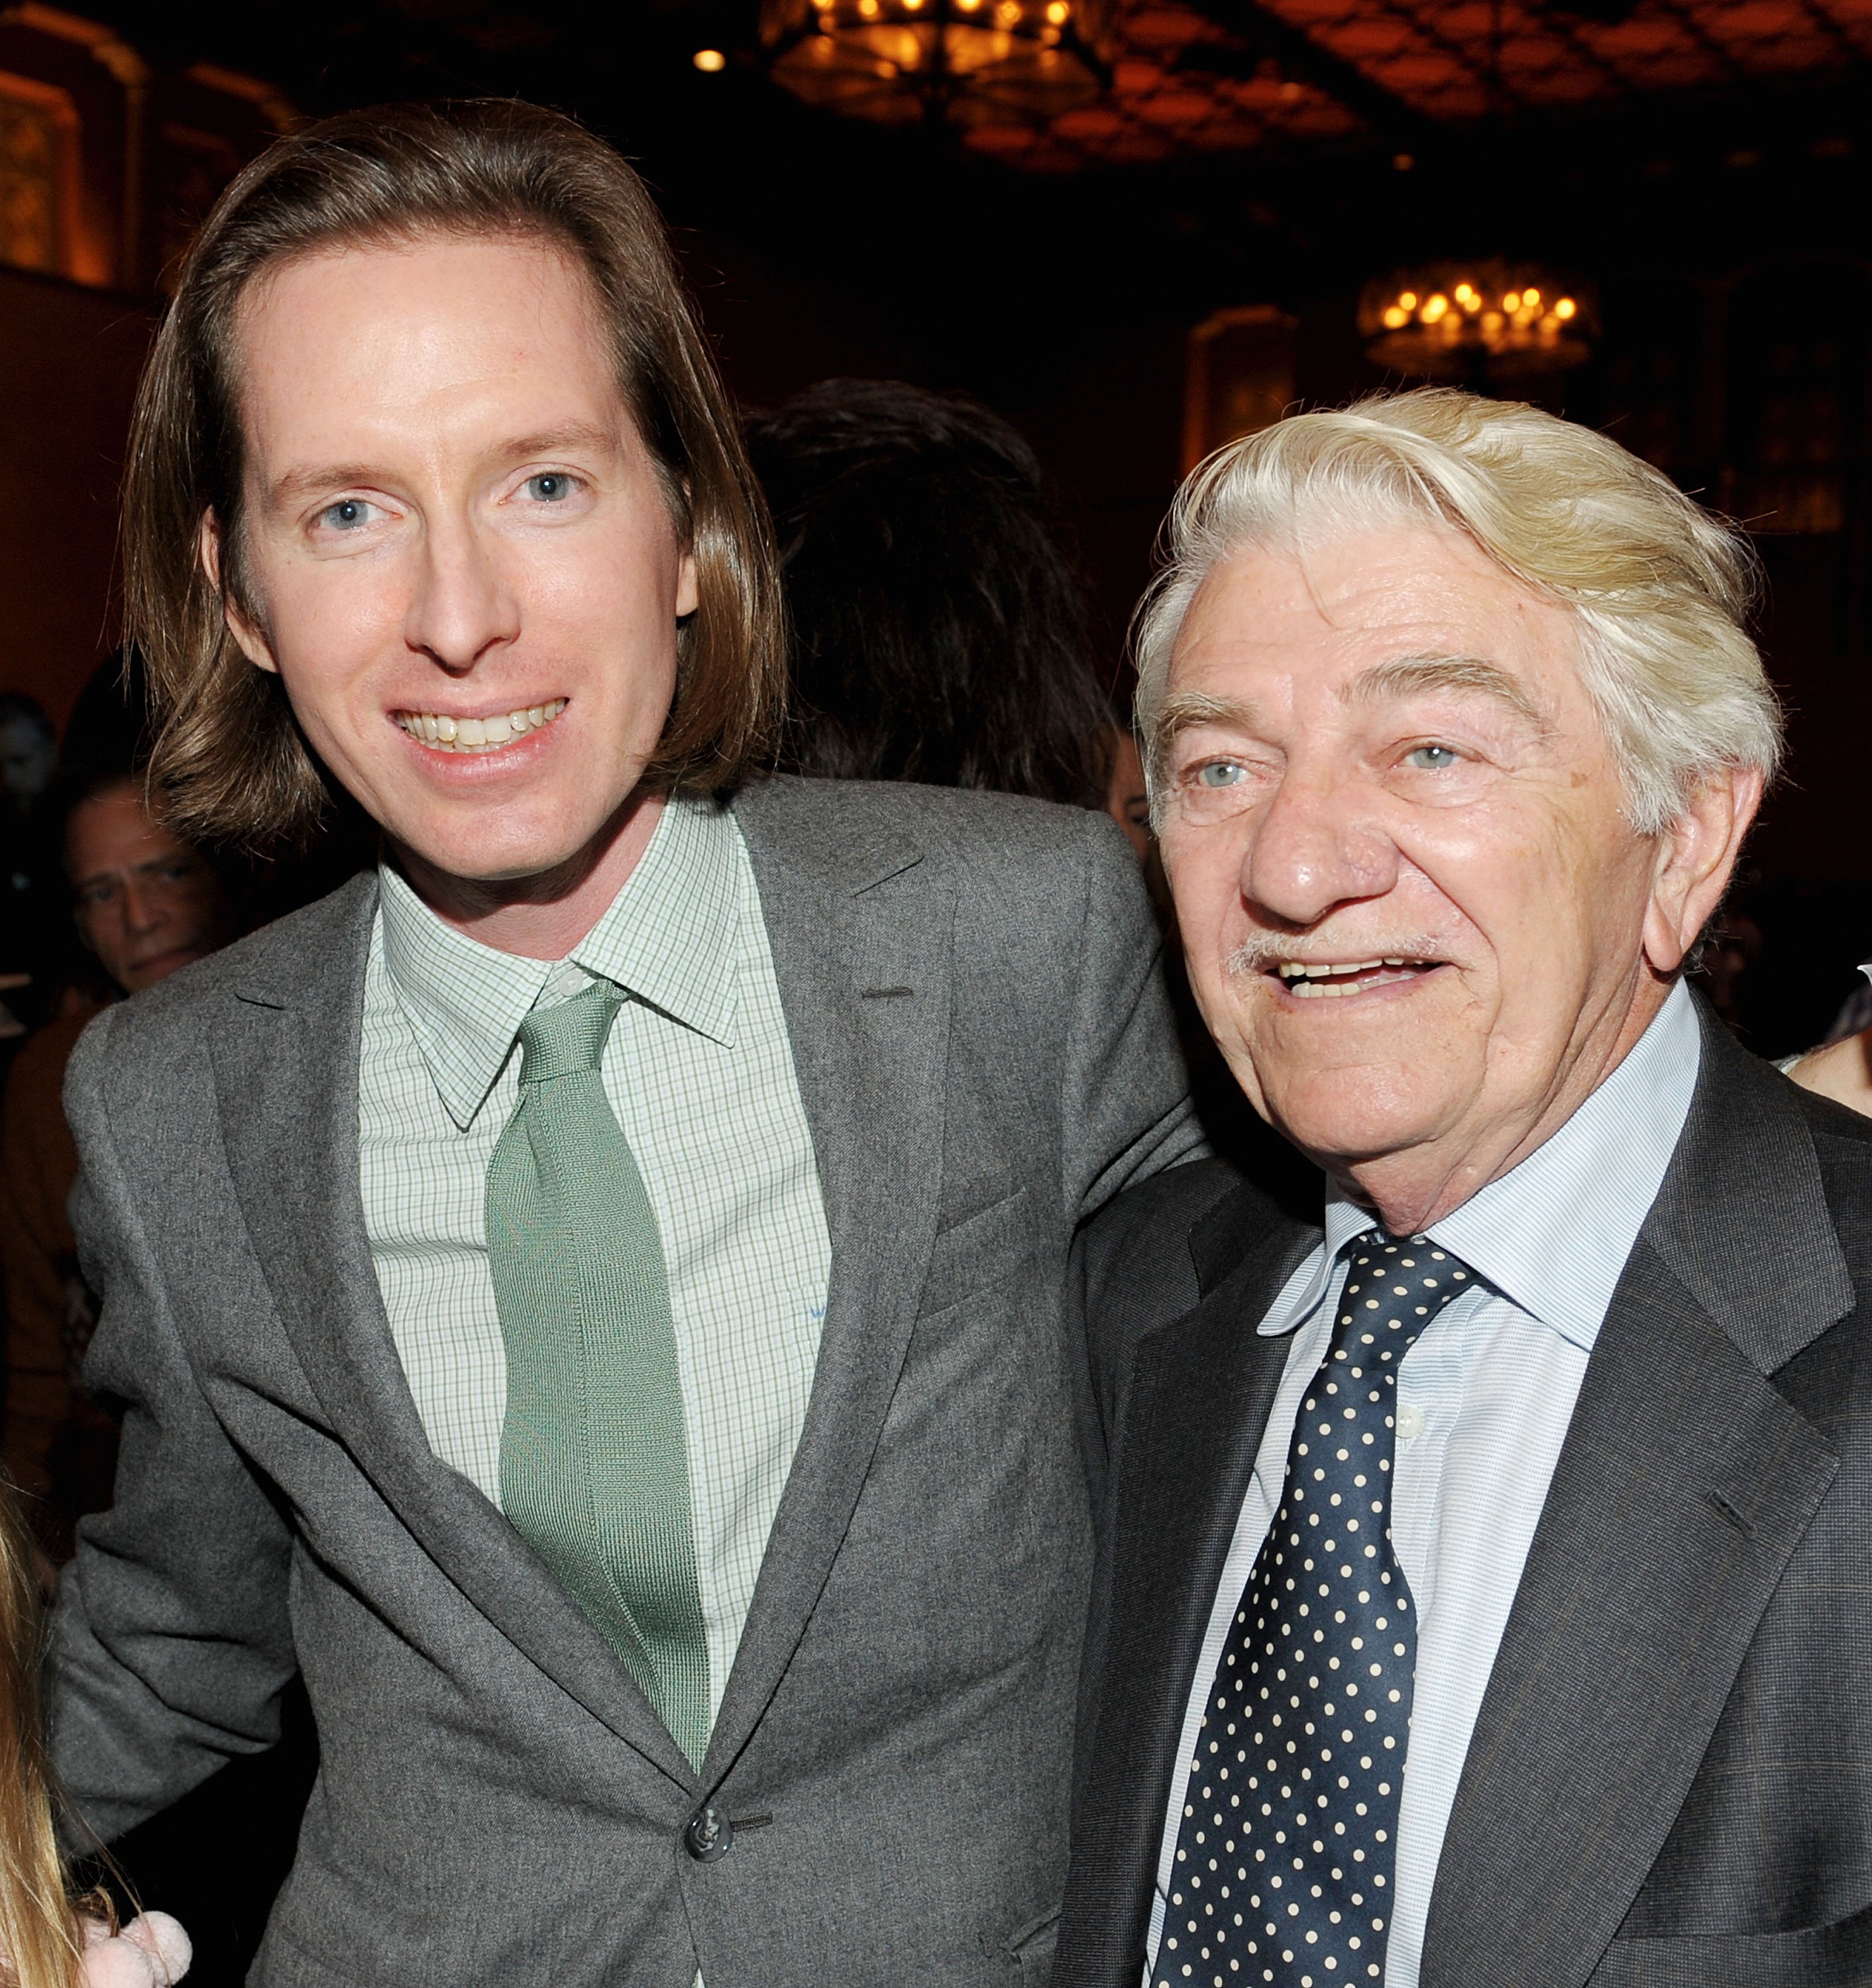 Wes Anderson and Seymour Cassel at the afterparty for the AFI FEST 2009 premiere of "Fantastic Mr. Fox" on October 30, 2009 in Los Angeles. | Source: Getty Images